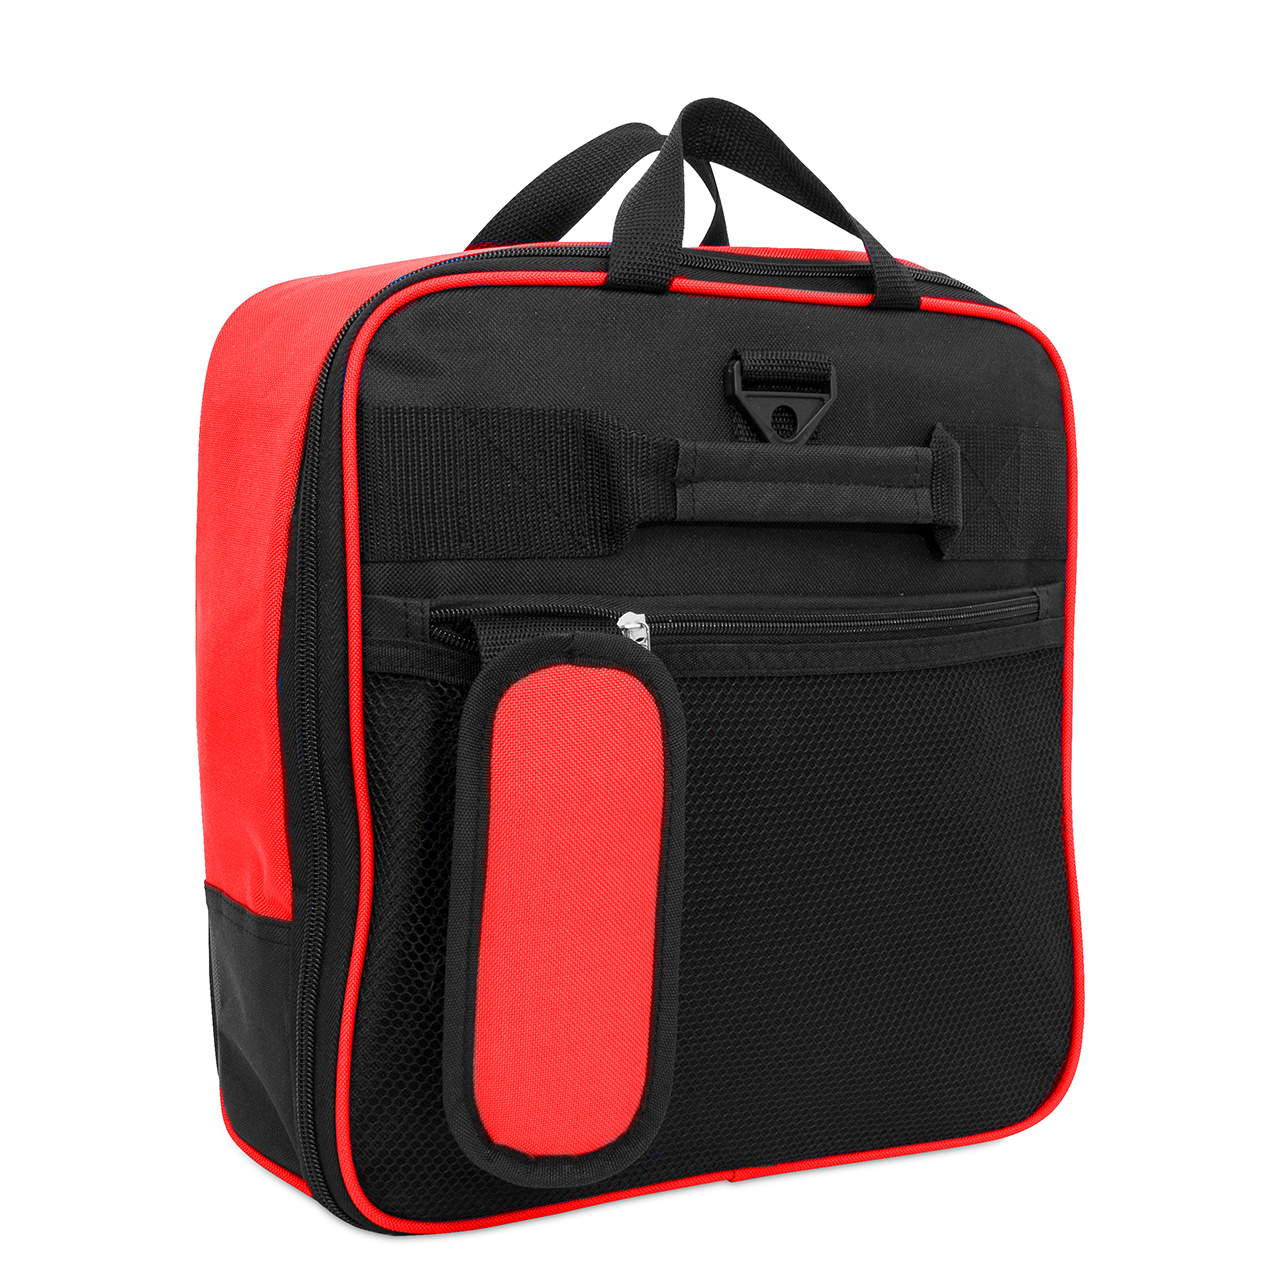 Large Travel Bag with Wheels